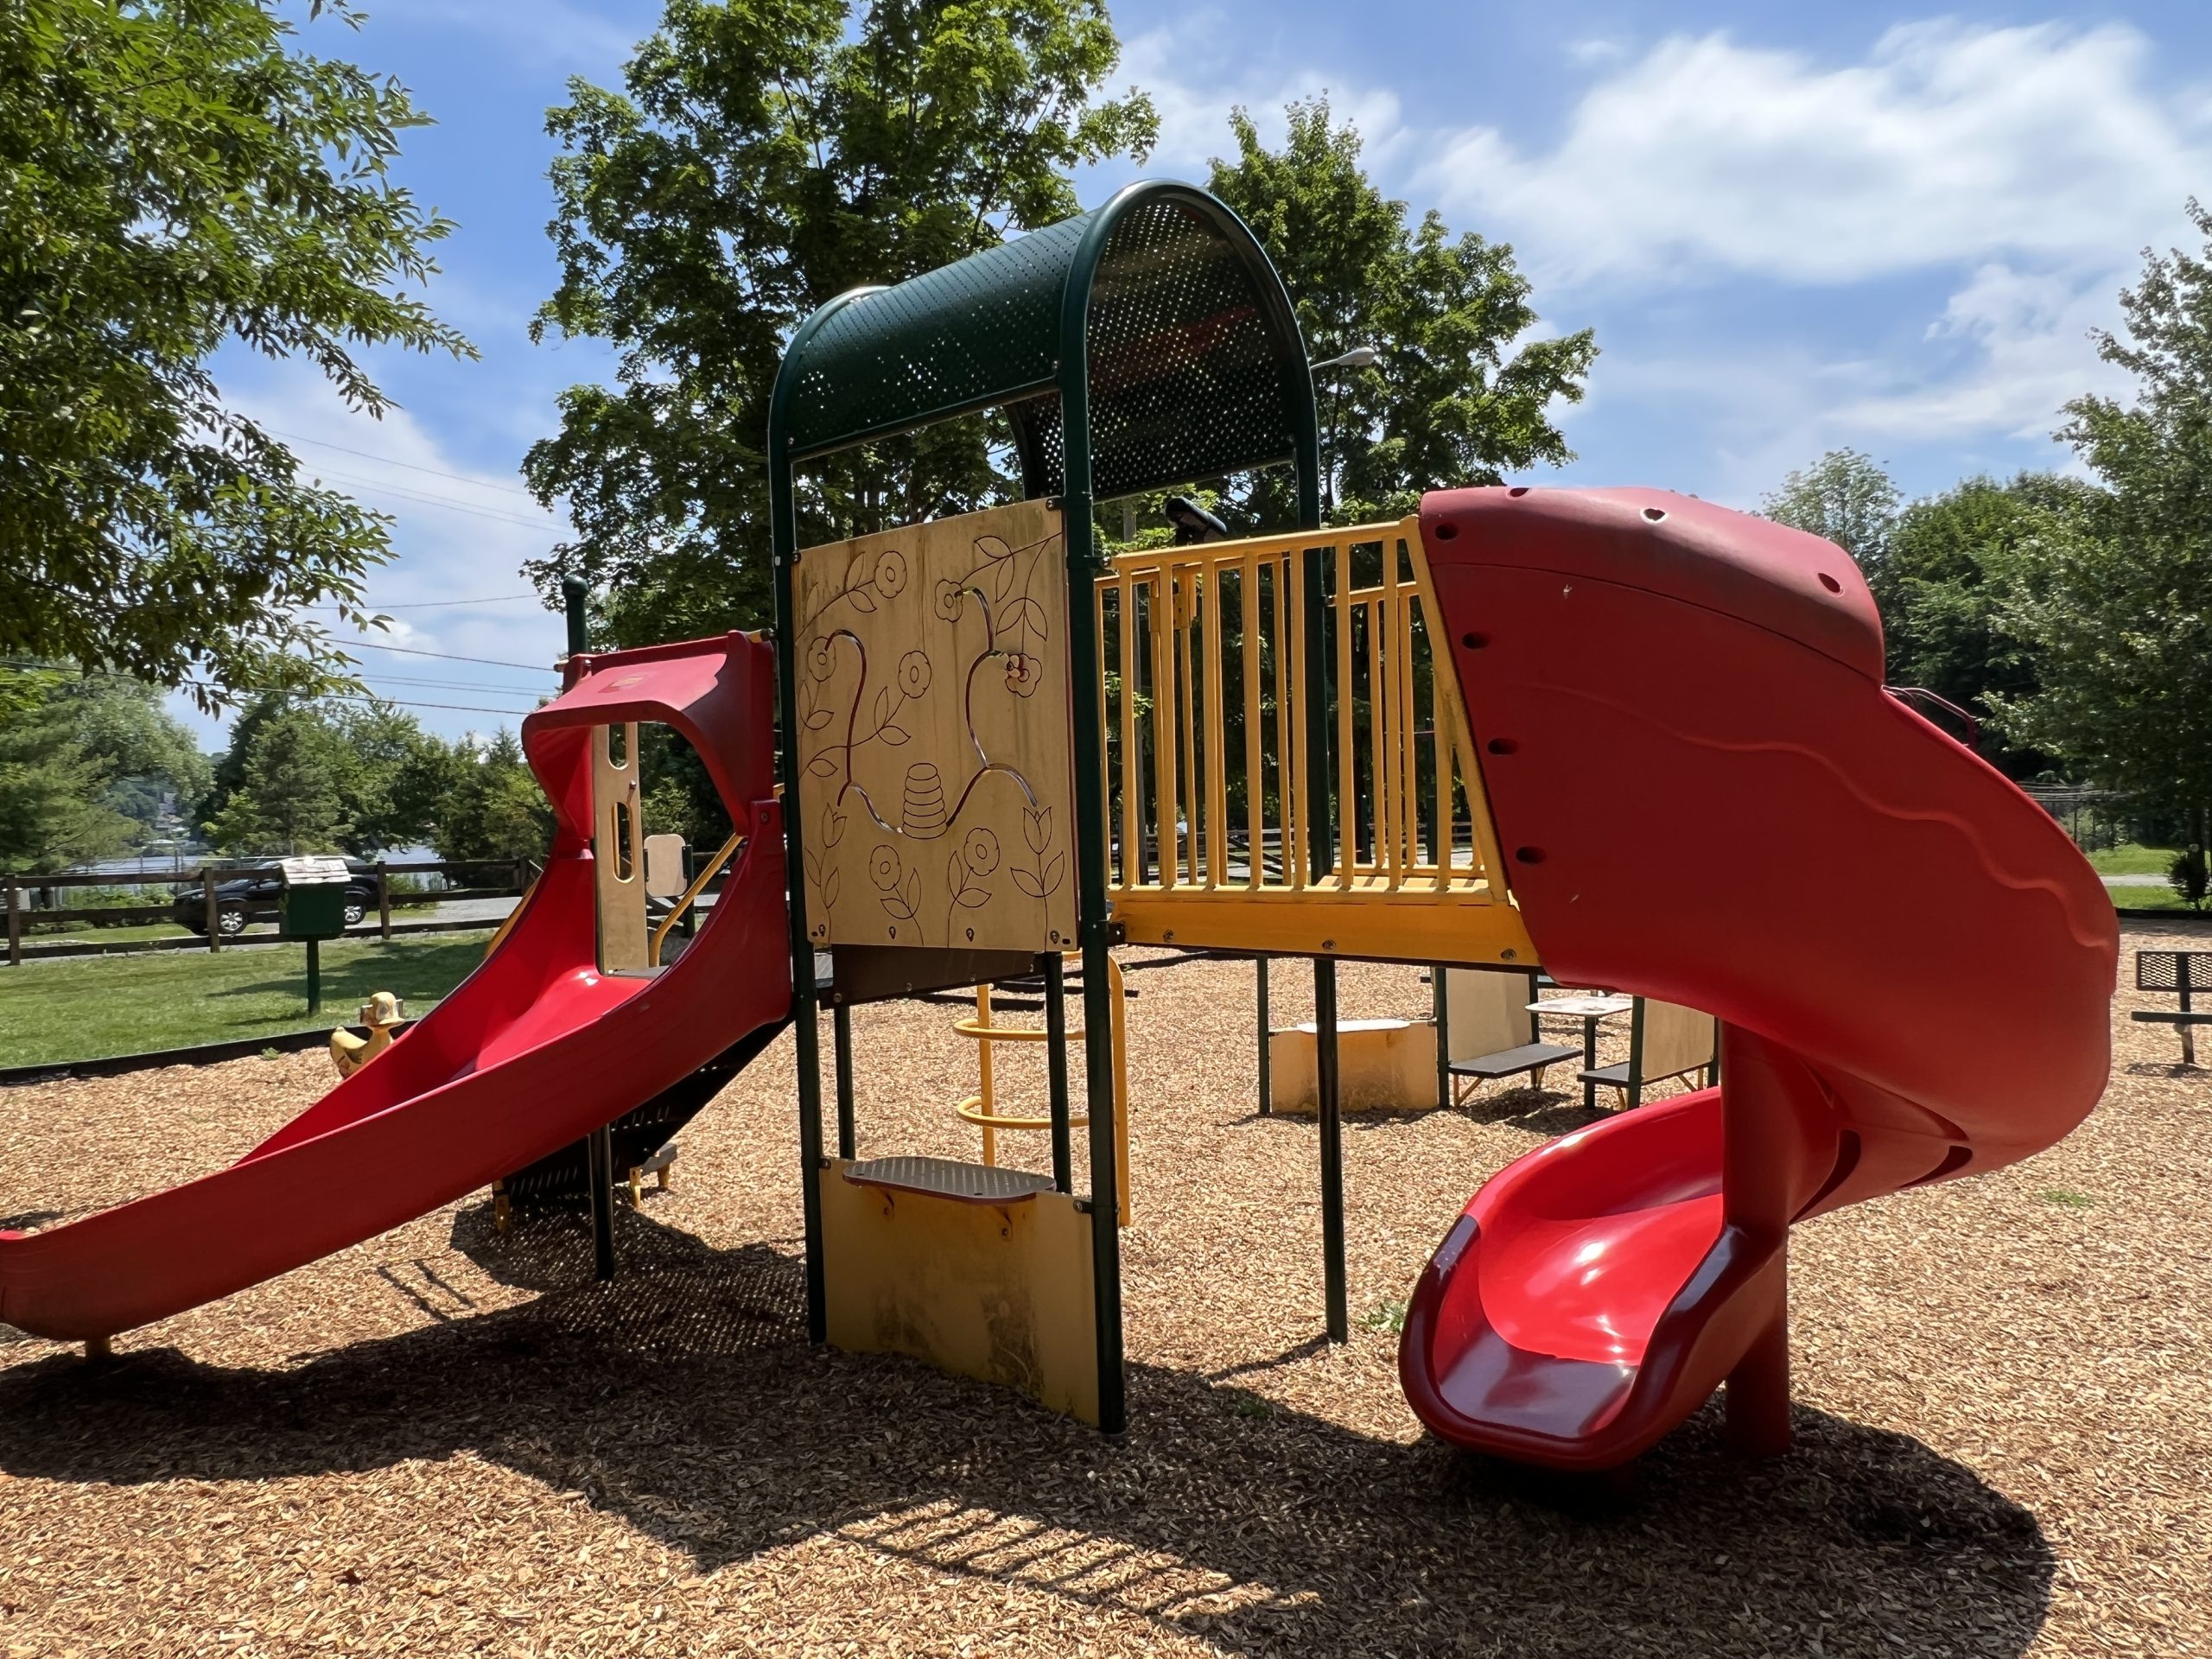 Lake Musconetcong Park Playground in Stanhope NJ - WIDE image - red slide structure flower side